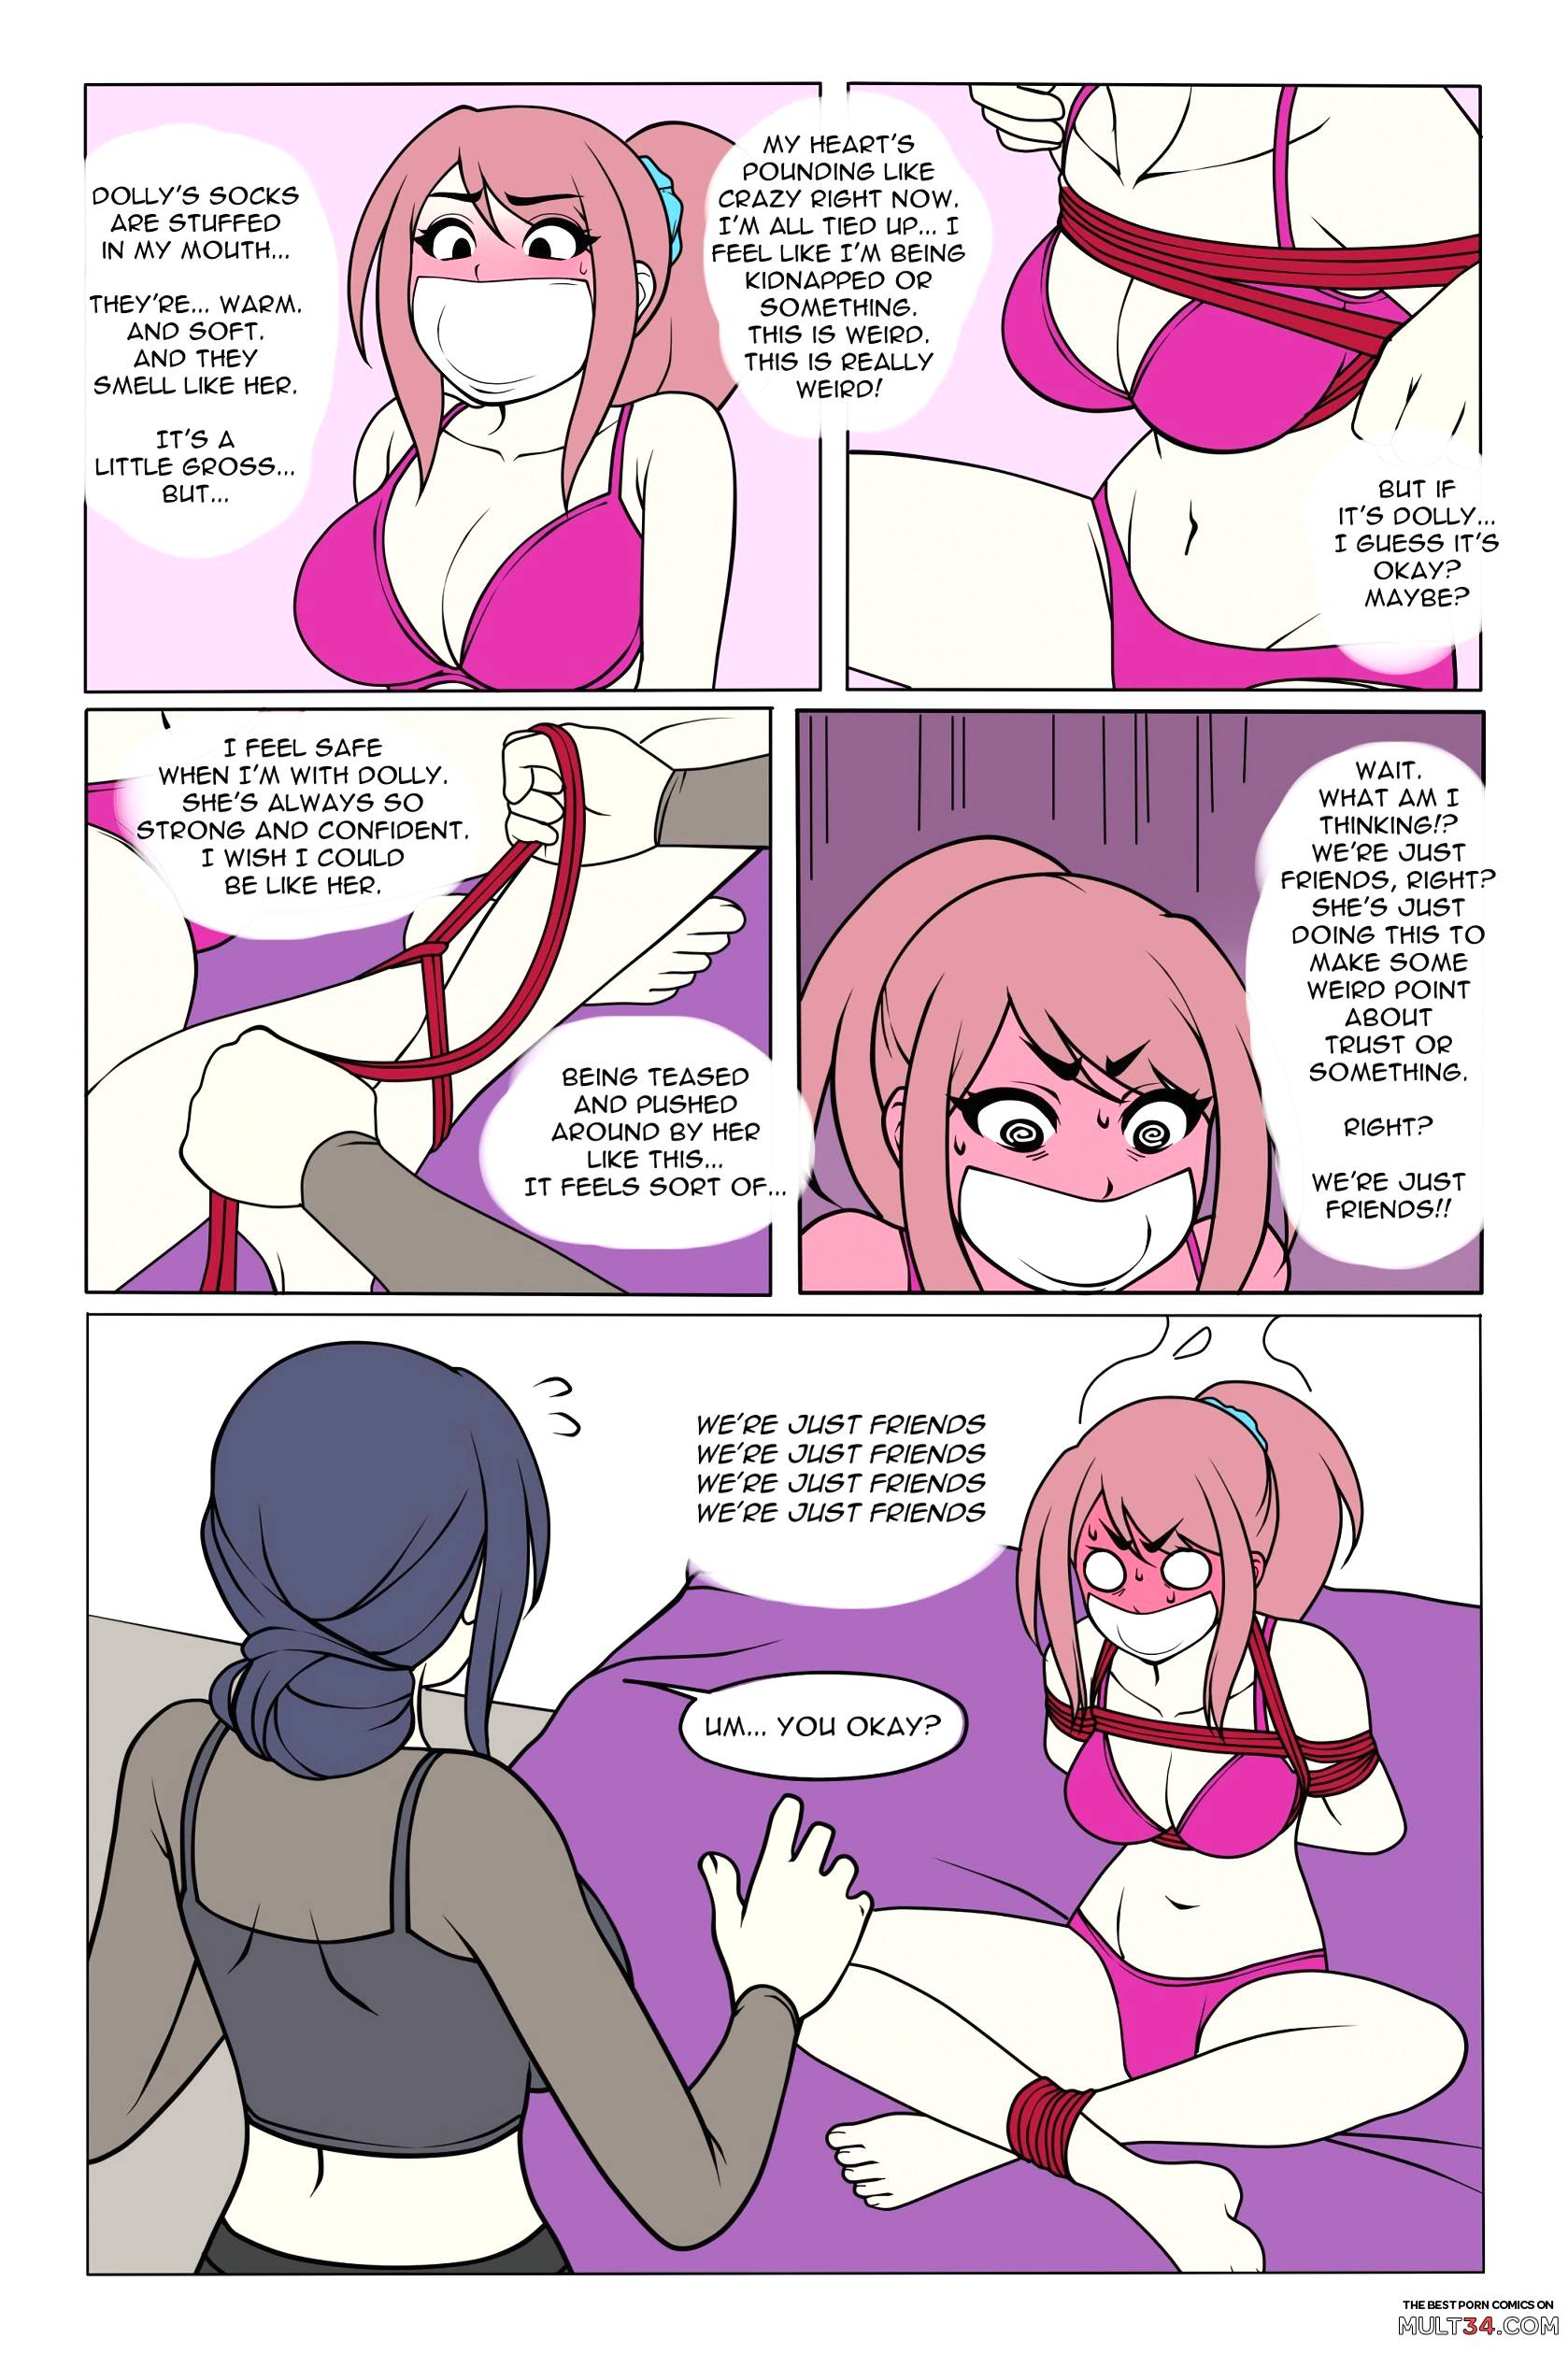 Dominated By Dolly page 7